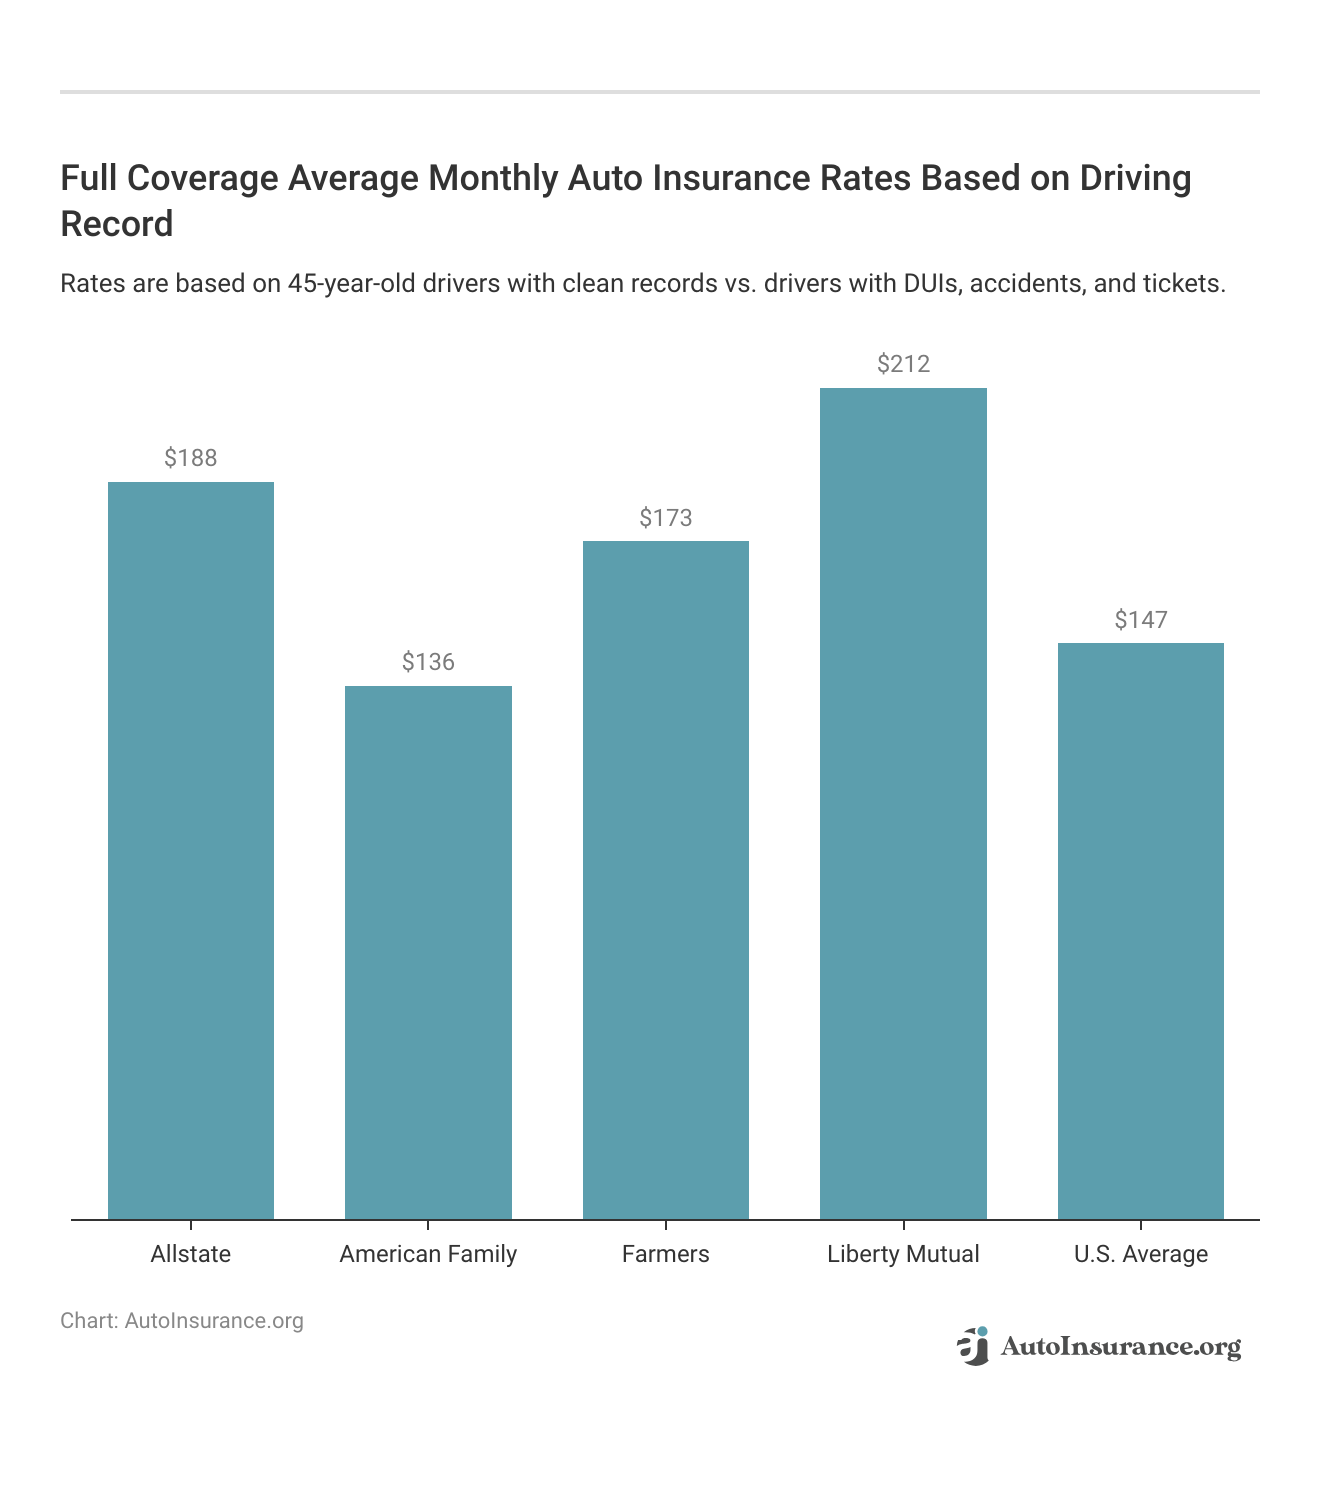 <h3>Full Coverage Average Monthly Auto Insurance Rates Based on Driving Record</h3>